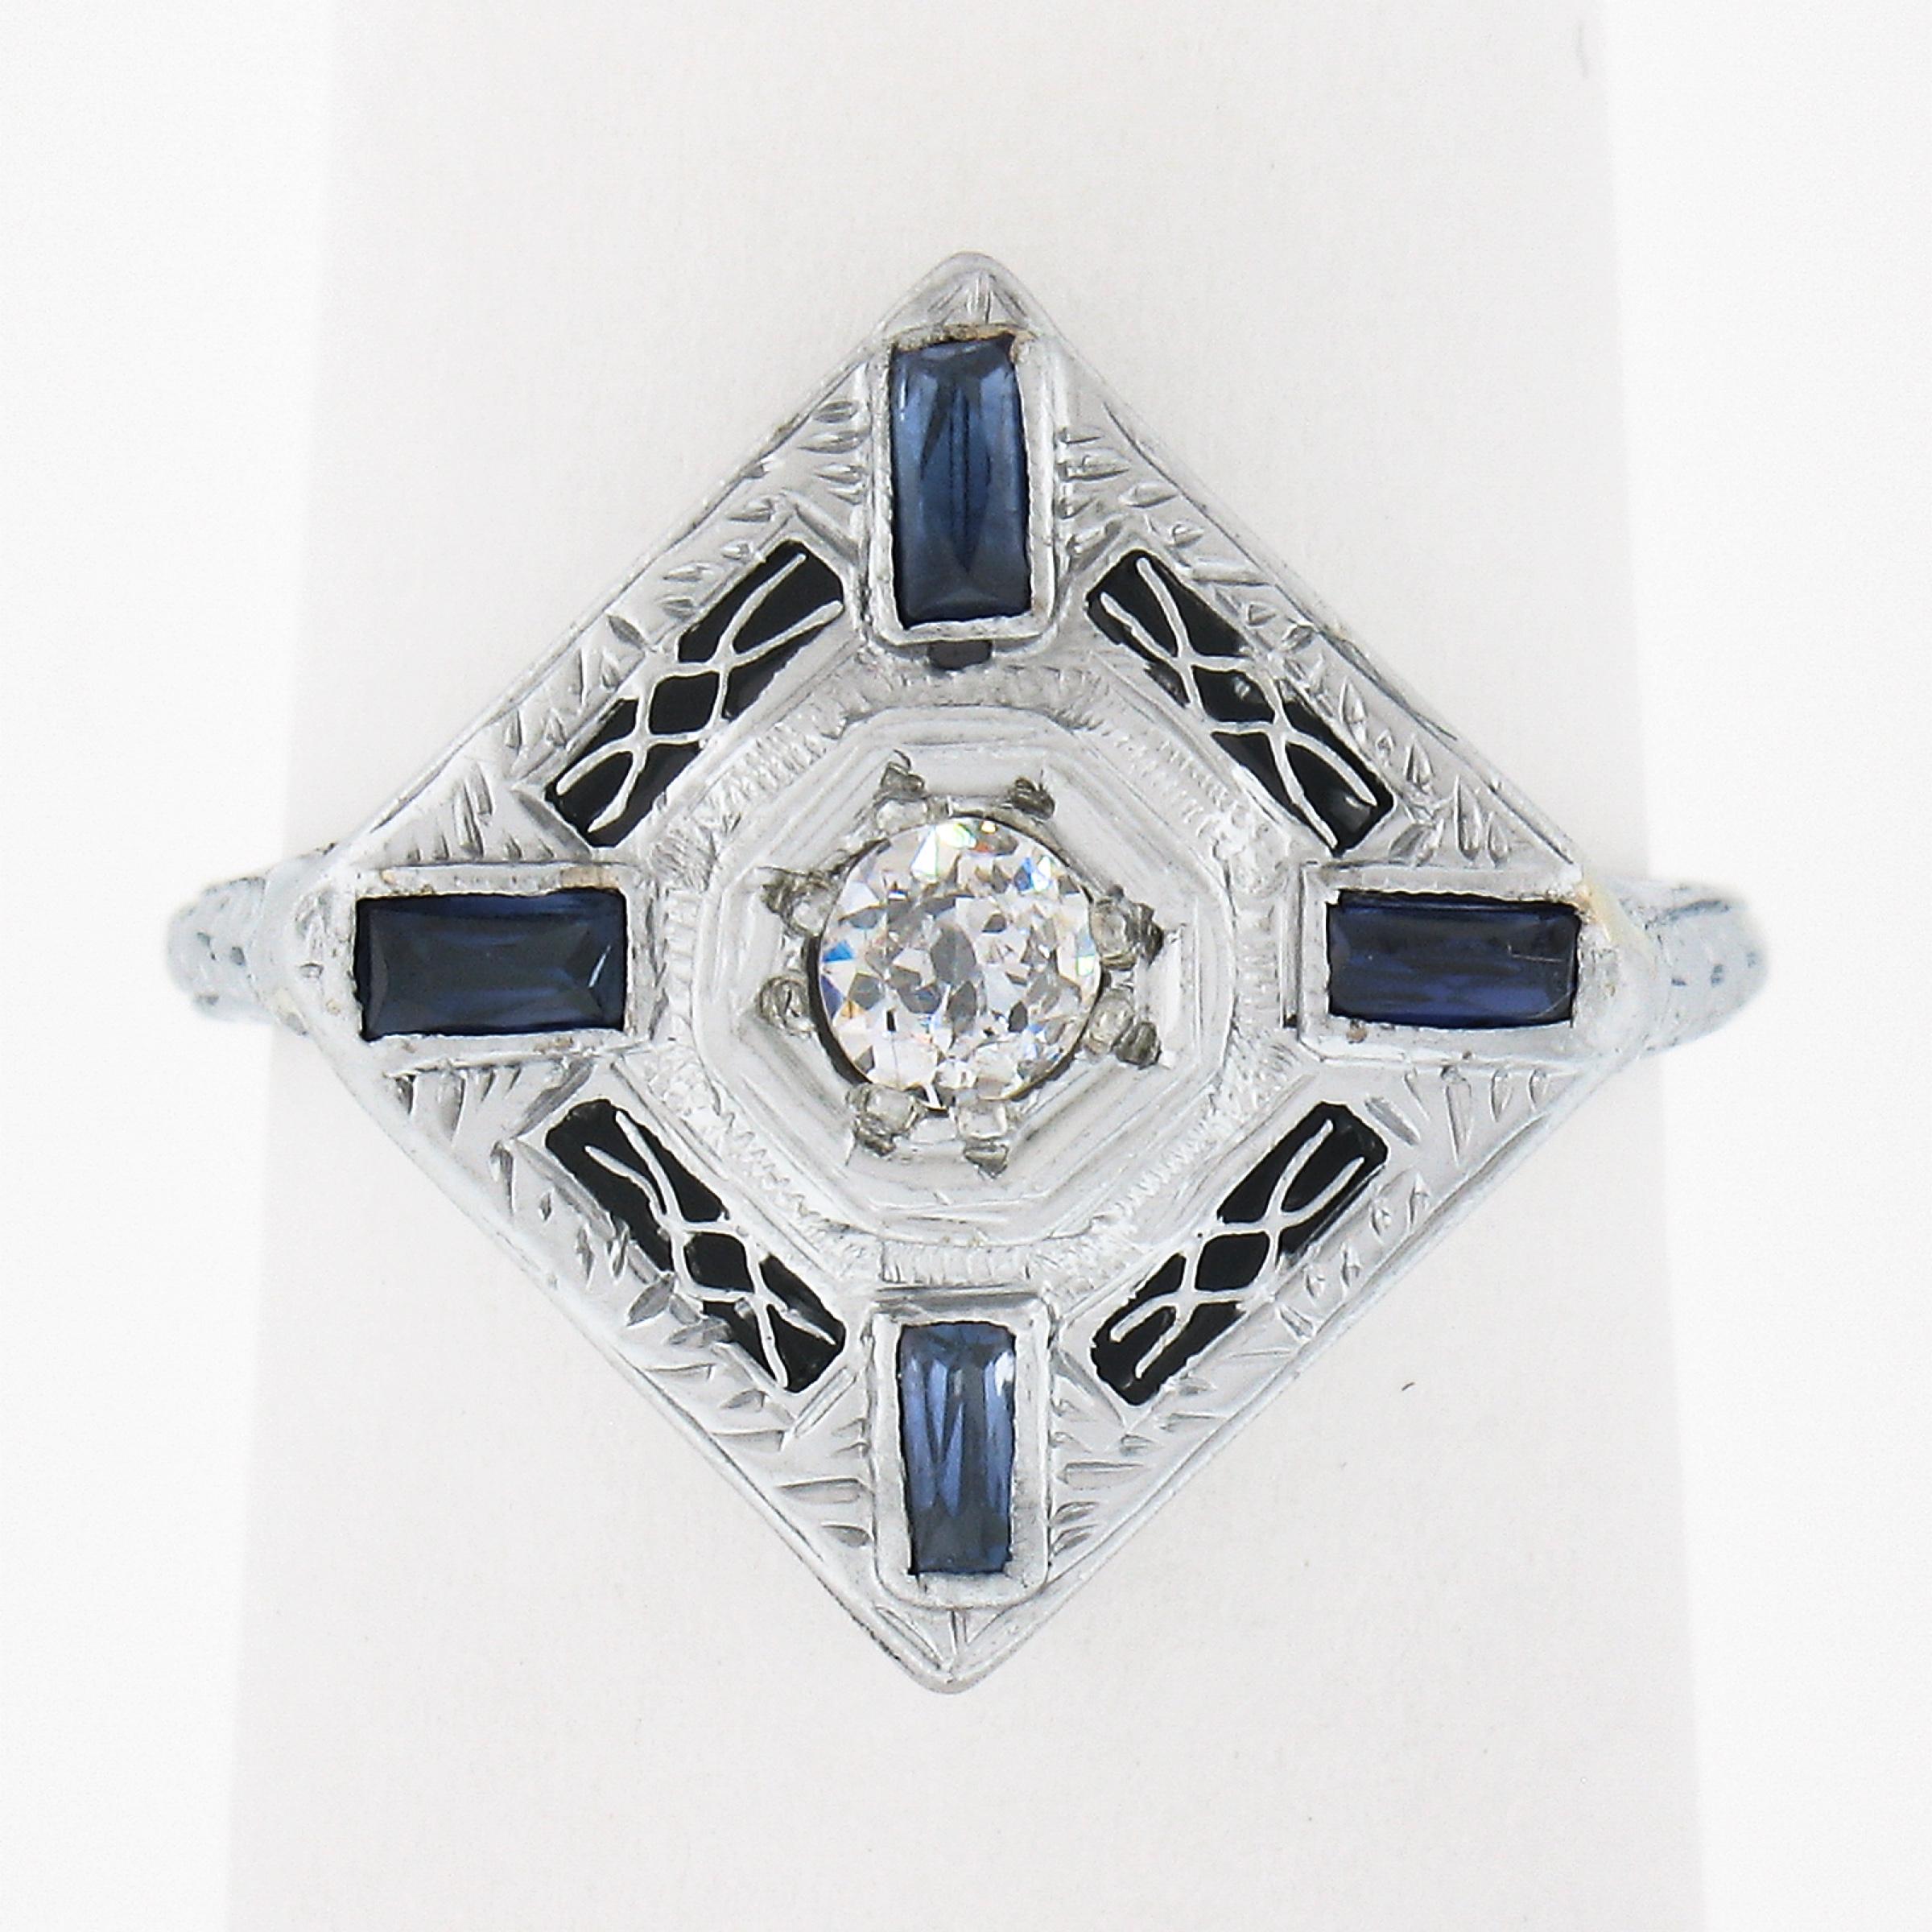 This beautiful, antique art deco dinner ring was crafted in solid 18k white gold and remains crisp with its engraving and filigree work intact. The unique platter design is adorned with open filigree work and is set with synthetic sapphires and an